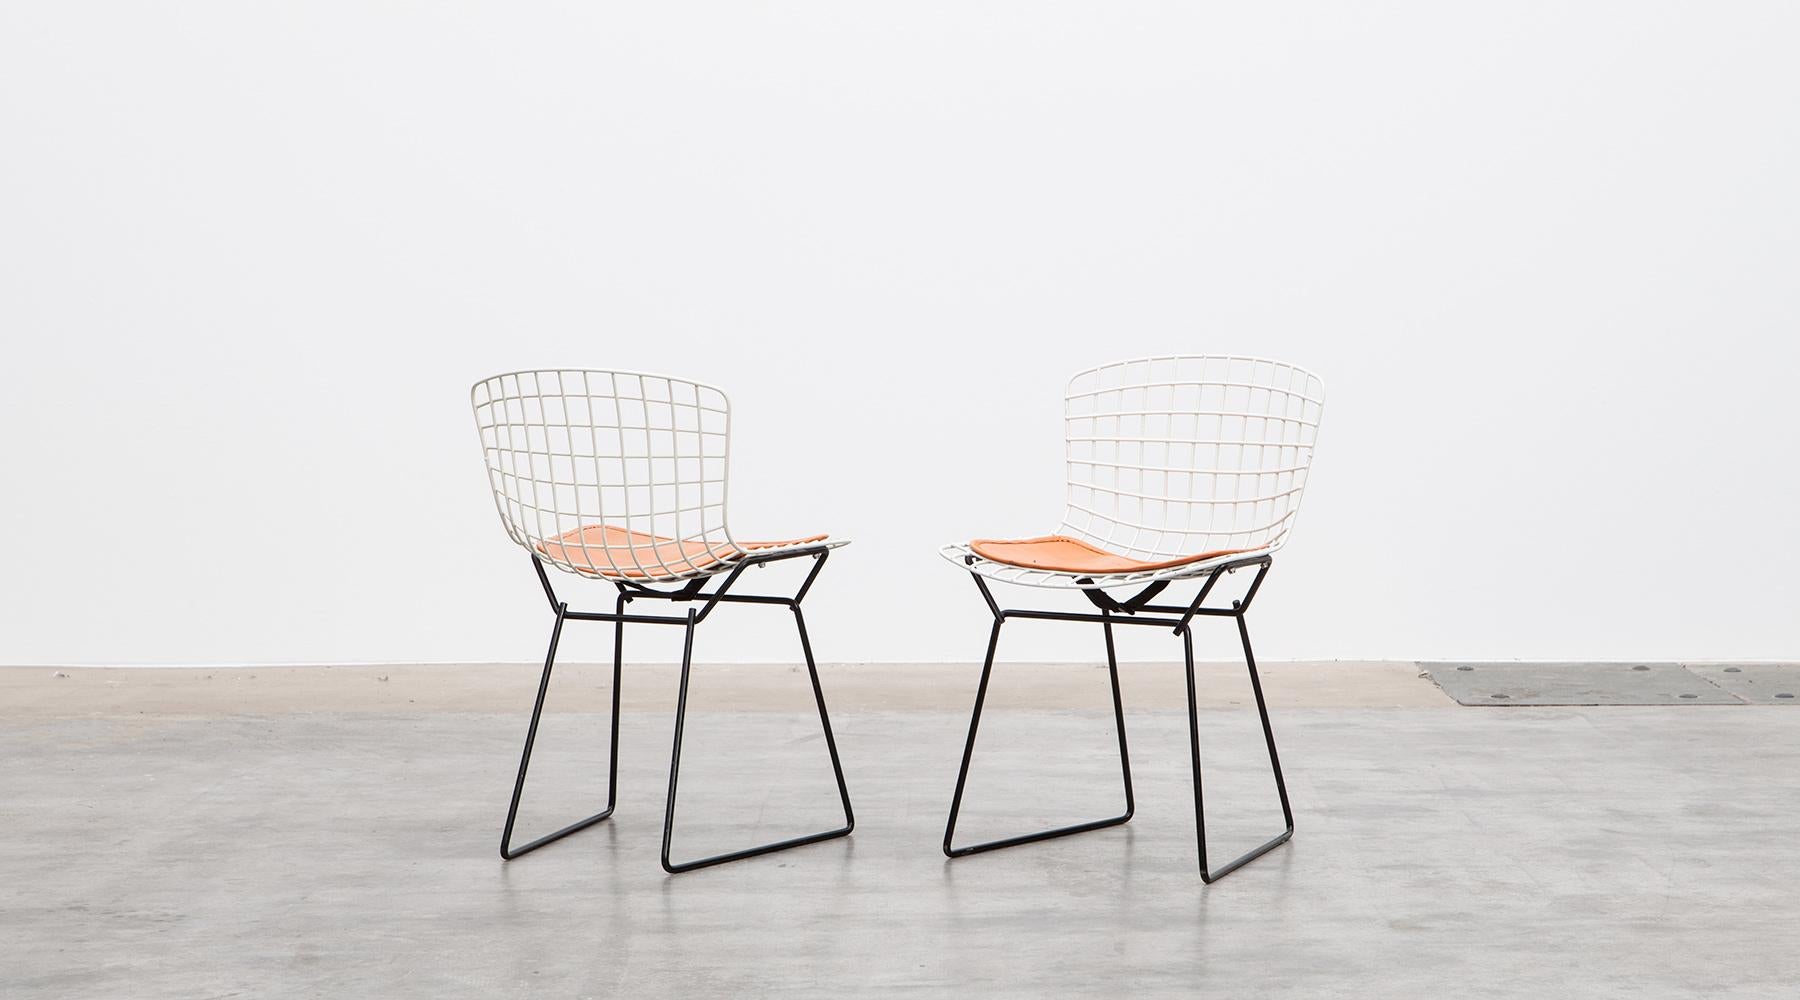 Pair of kids side chair, chrome-plated steel wire by Harry Bertoia, USA, 1952.

Italoamerican Designer Harry Bertoia developed this type of design from the famous 1952 Bertoia chair series, whose chrome-plated steel wires were reshaped by the weight